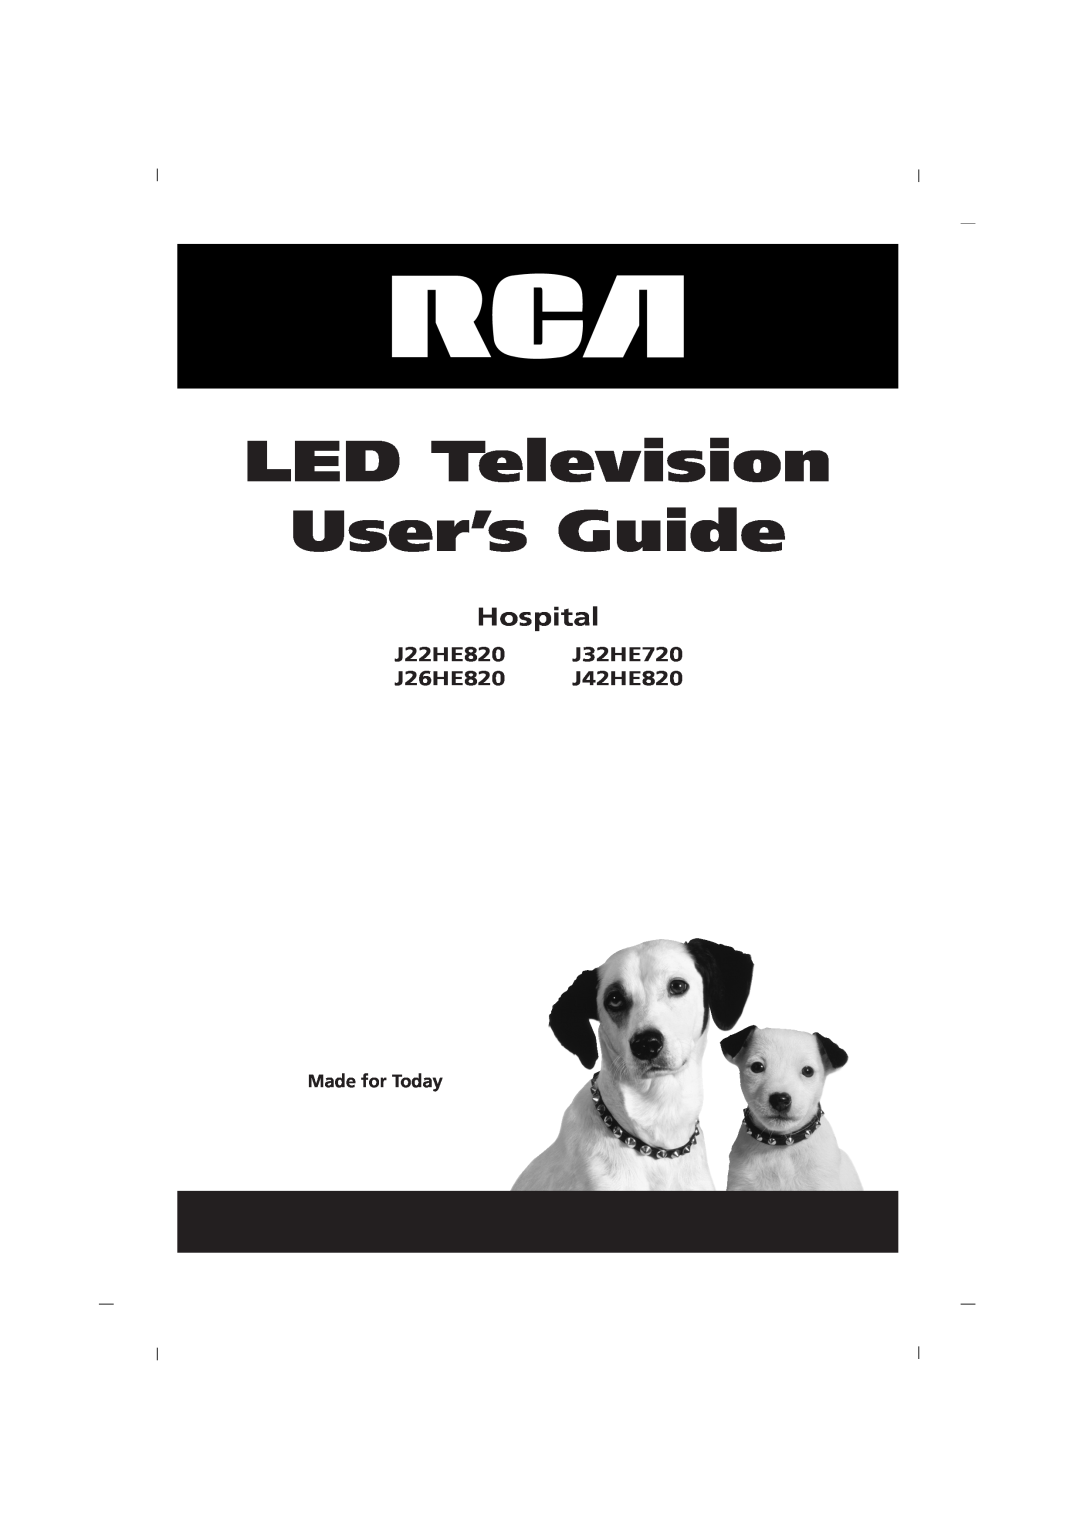 RCA manual LED Television User’s Guide, Hospital, J22HE820 J32HE720 J26HE820 J42HE820, Made for Today 